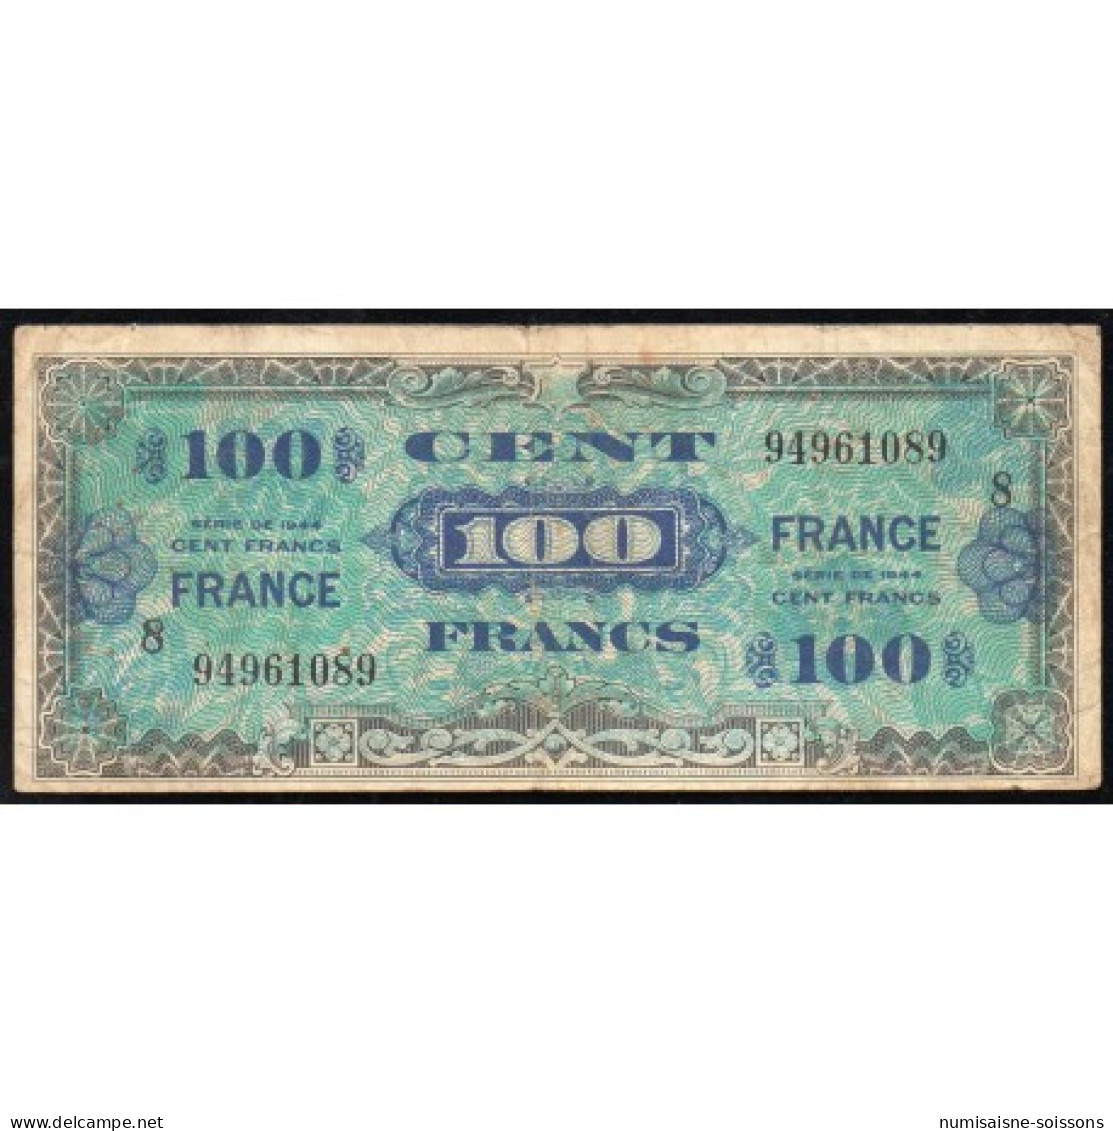 FAY VF 25/8 - 100 FRANCS VERSO FRANCE - 1945 - SERIE 8 - PICK 105s - TB - Unclassified